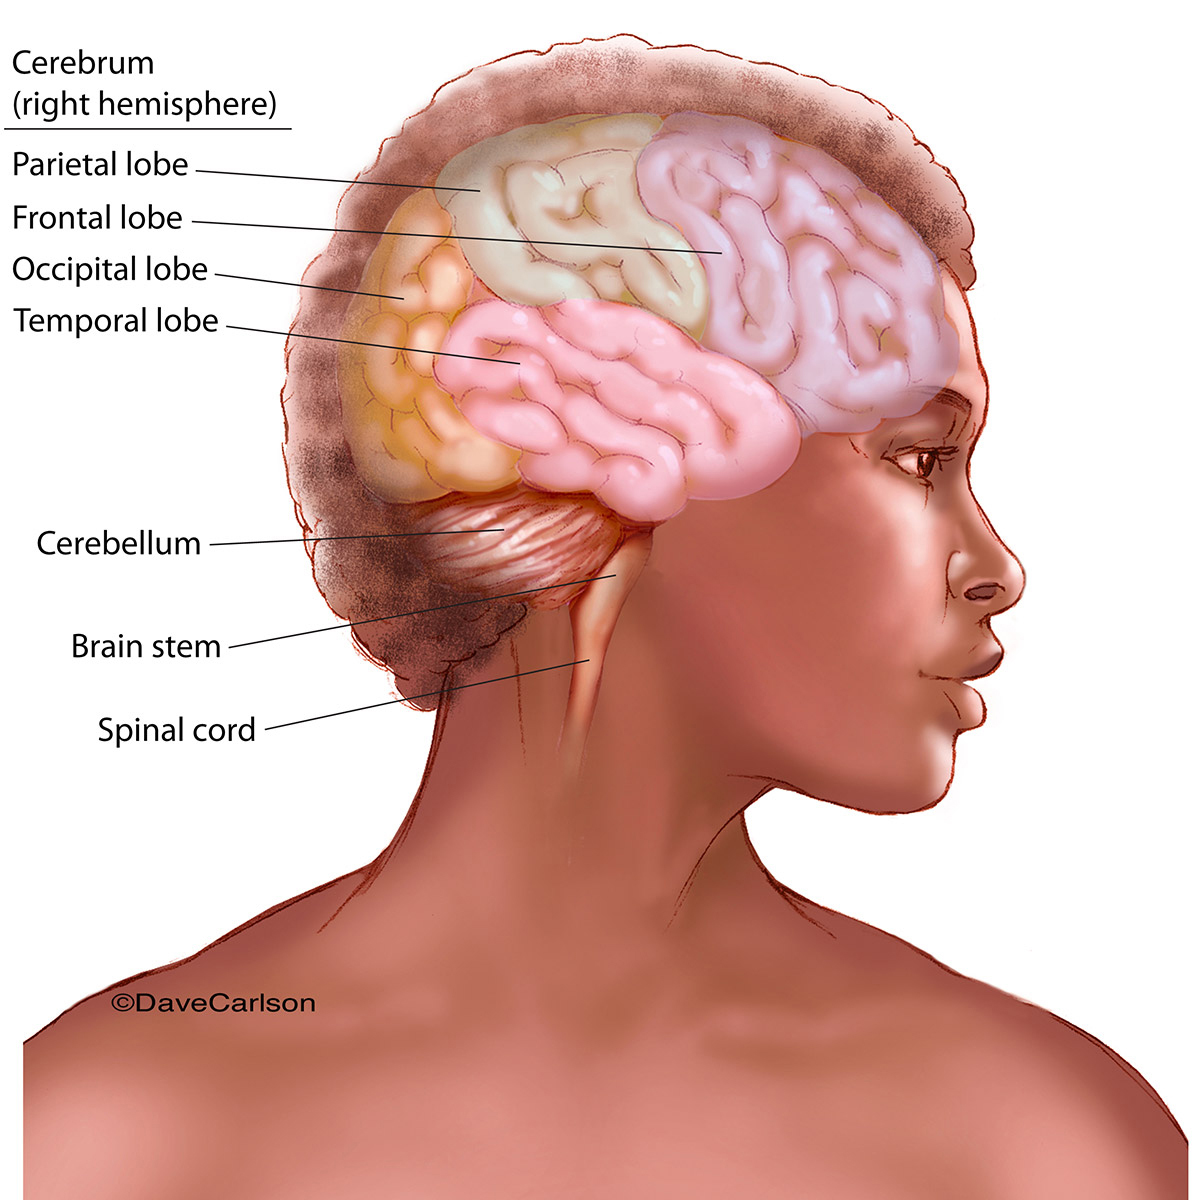 Color illustration of the general surface anatomy of the human brain, with lobes of cerebrum delineated